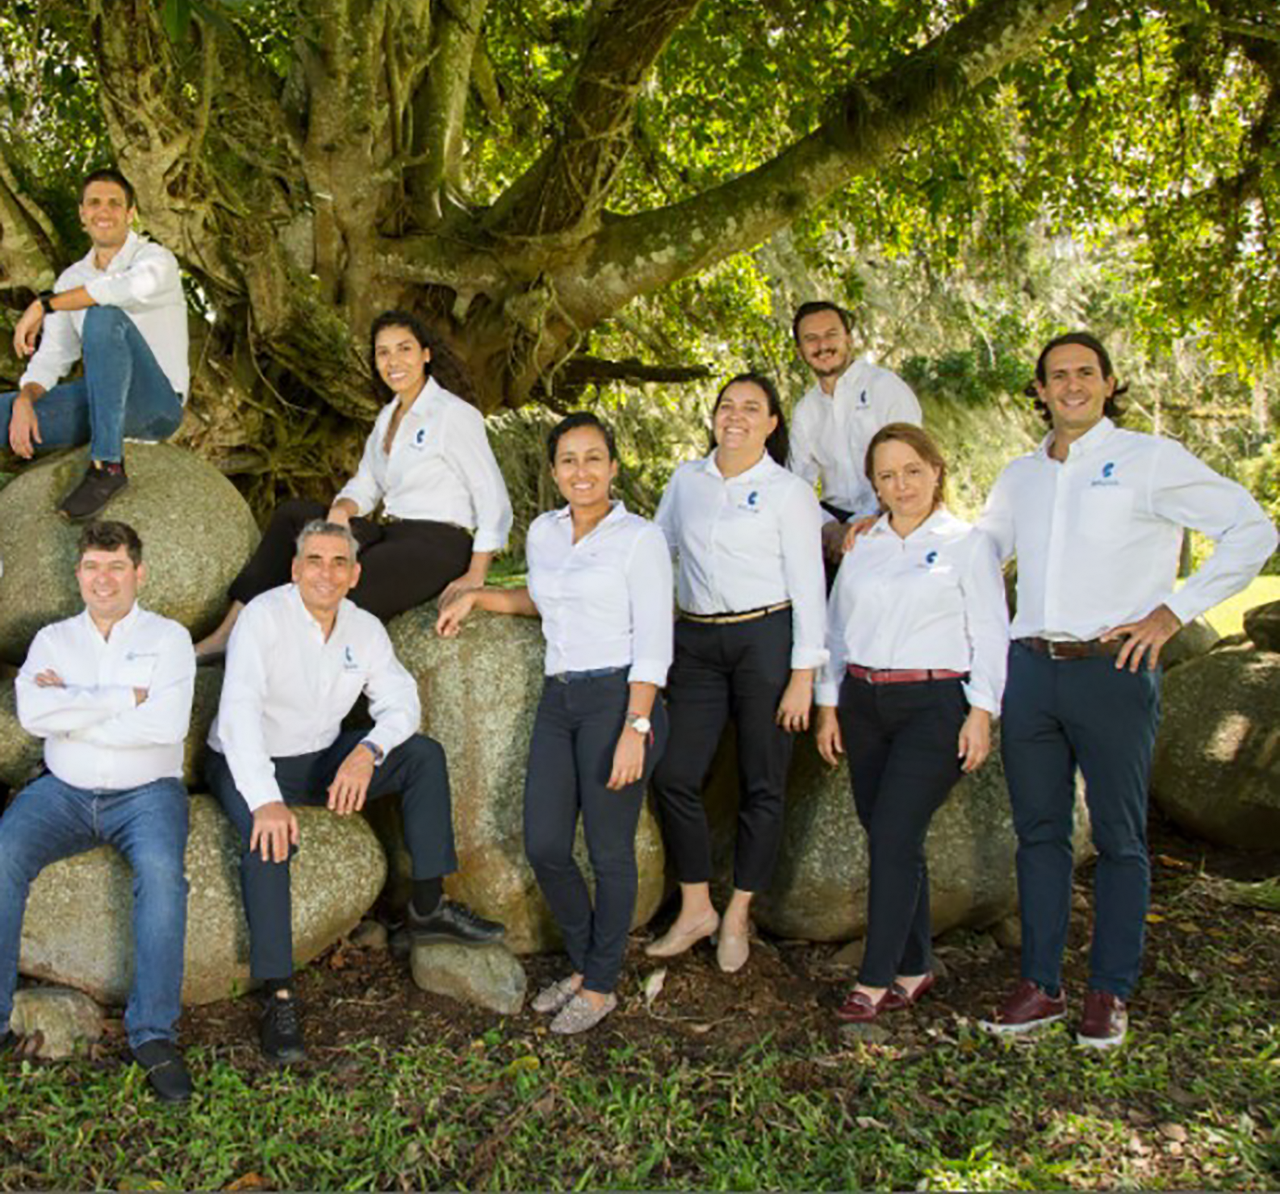 Bruna Group is a 3rd generation family business Costa Rica, Central America